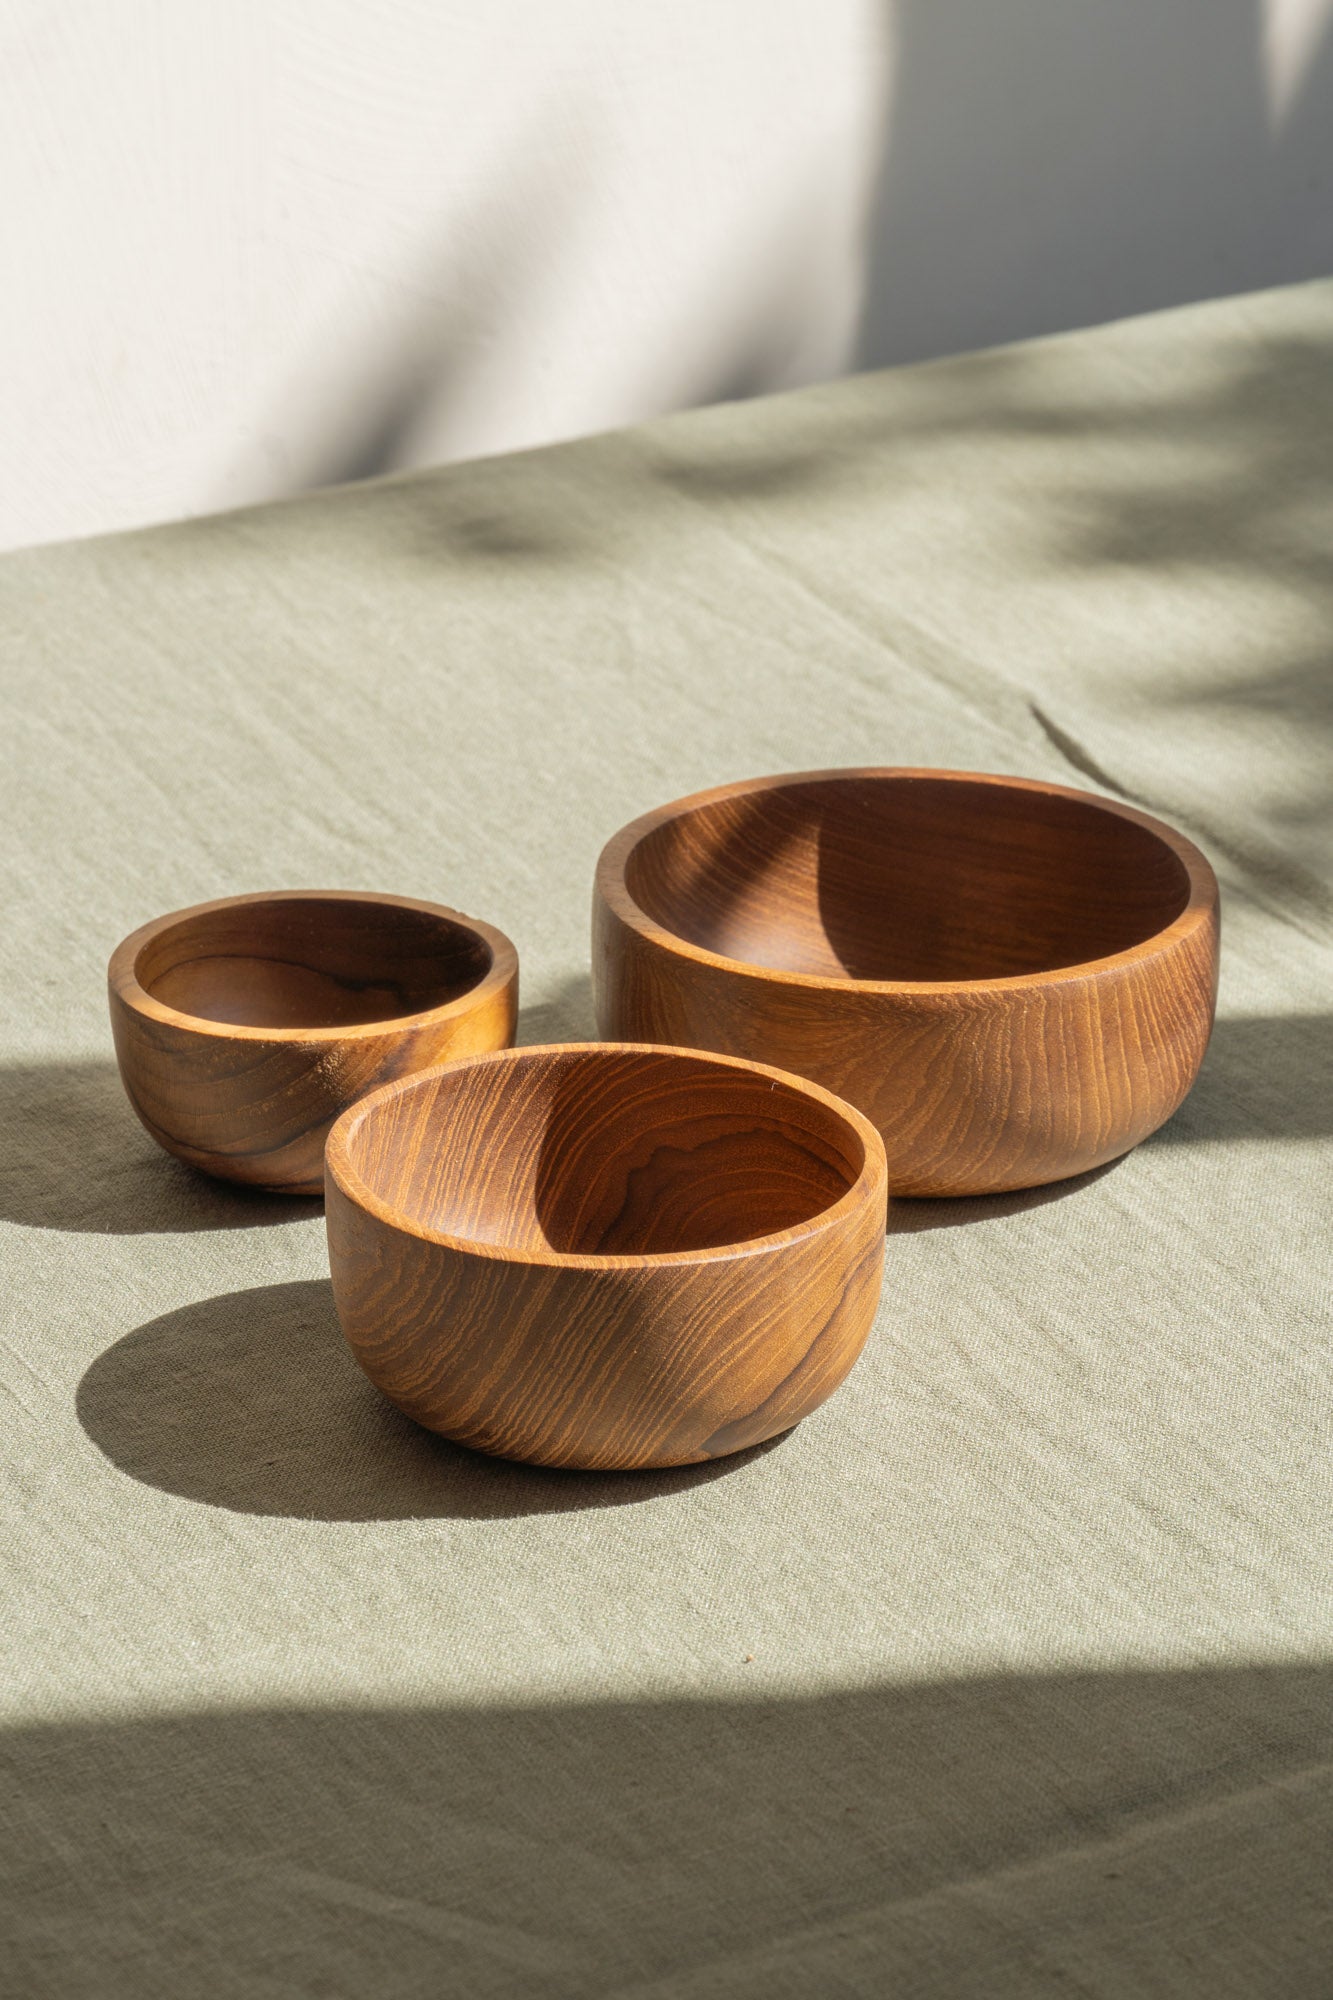 Three sizes of the Nibble Wooden Bowls by The Loft Selects.